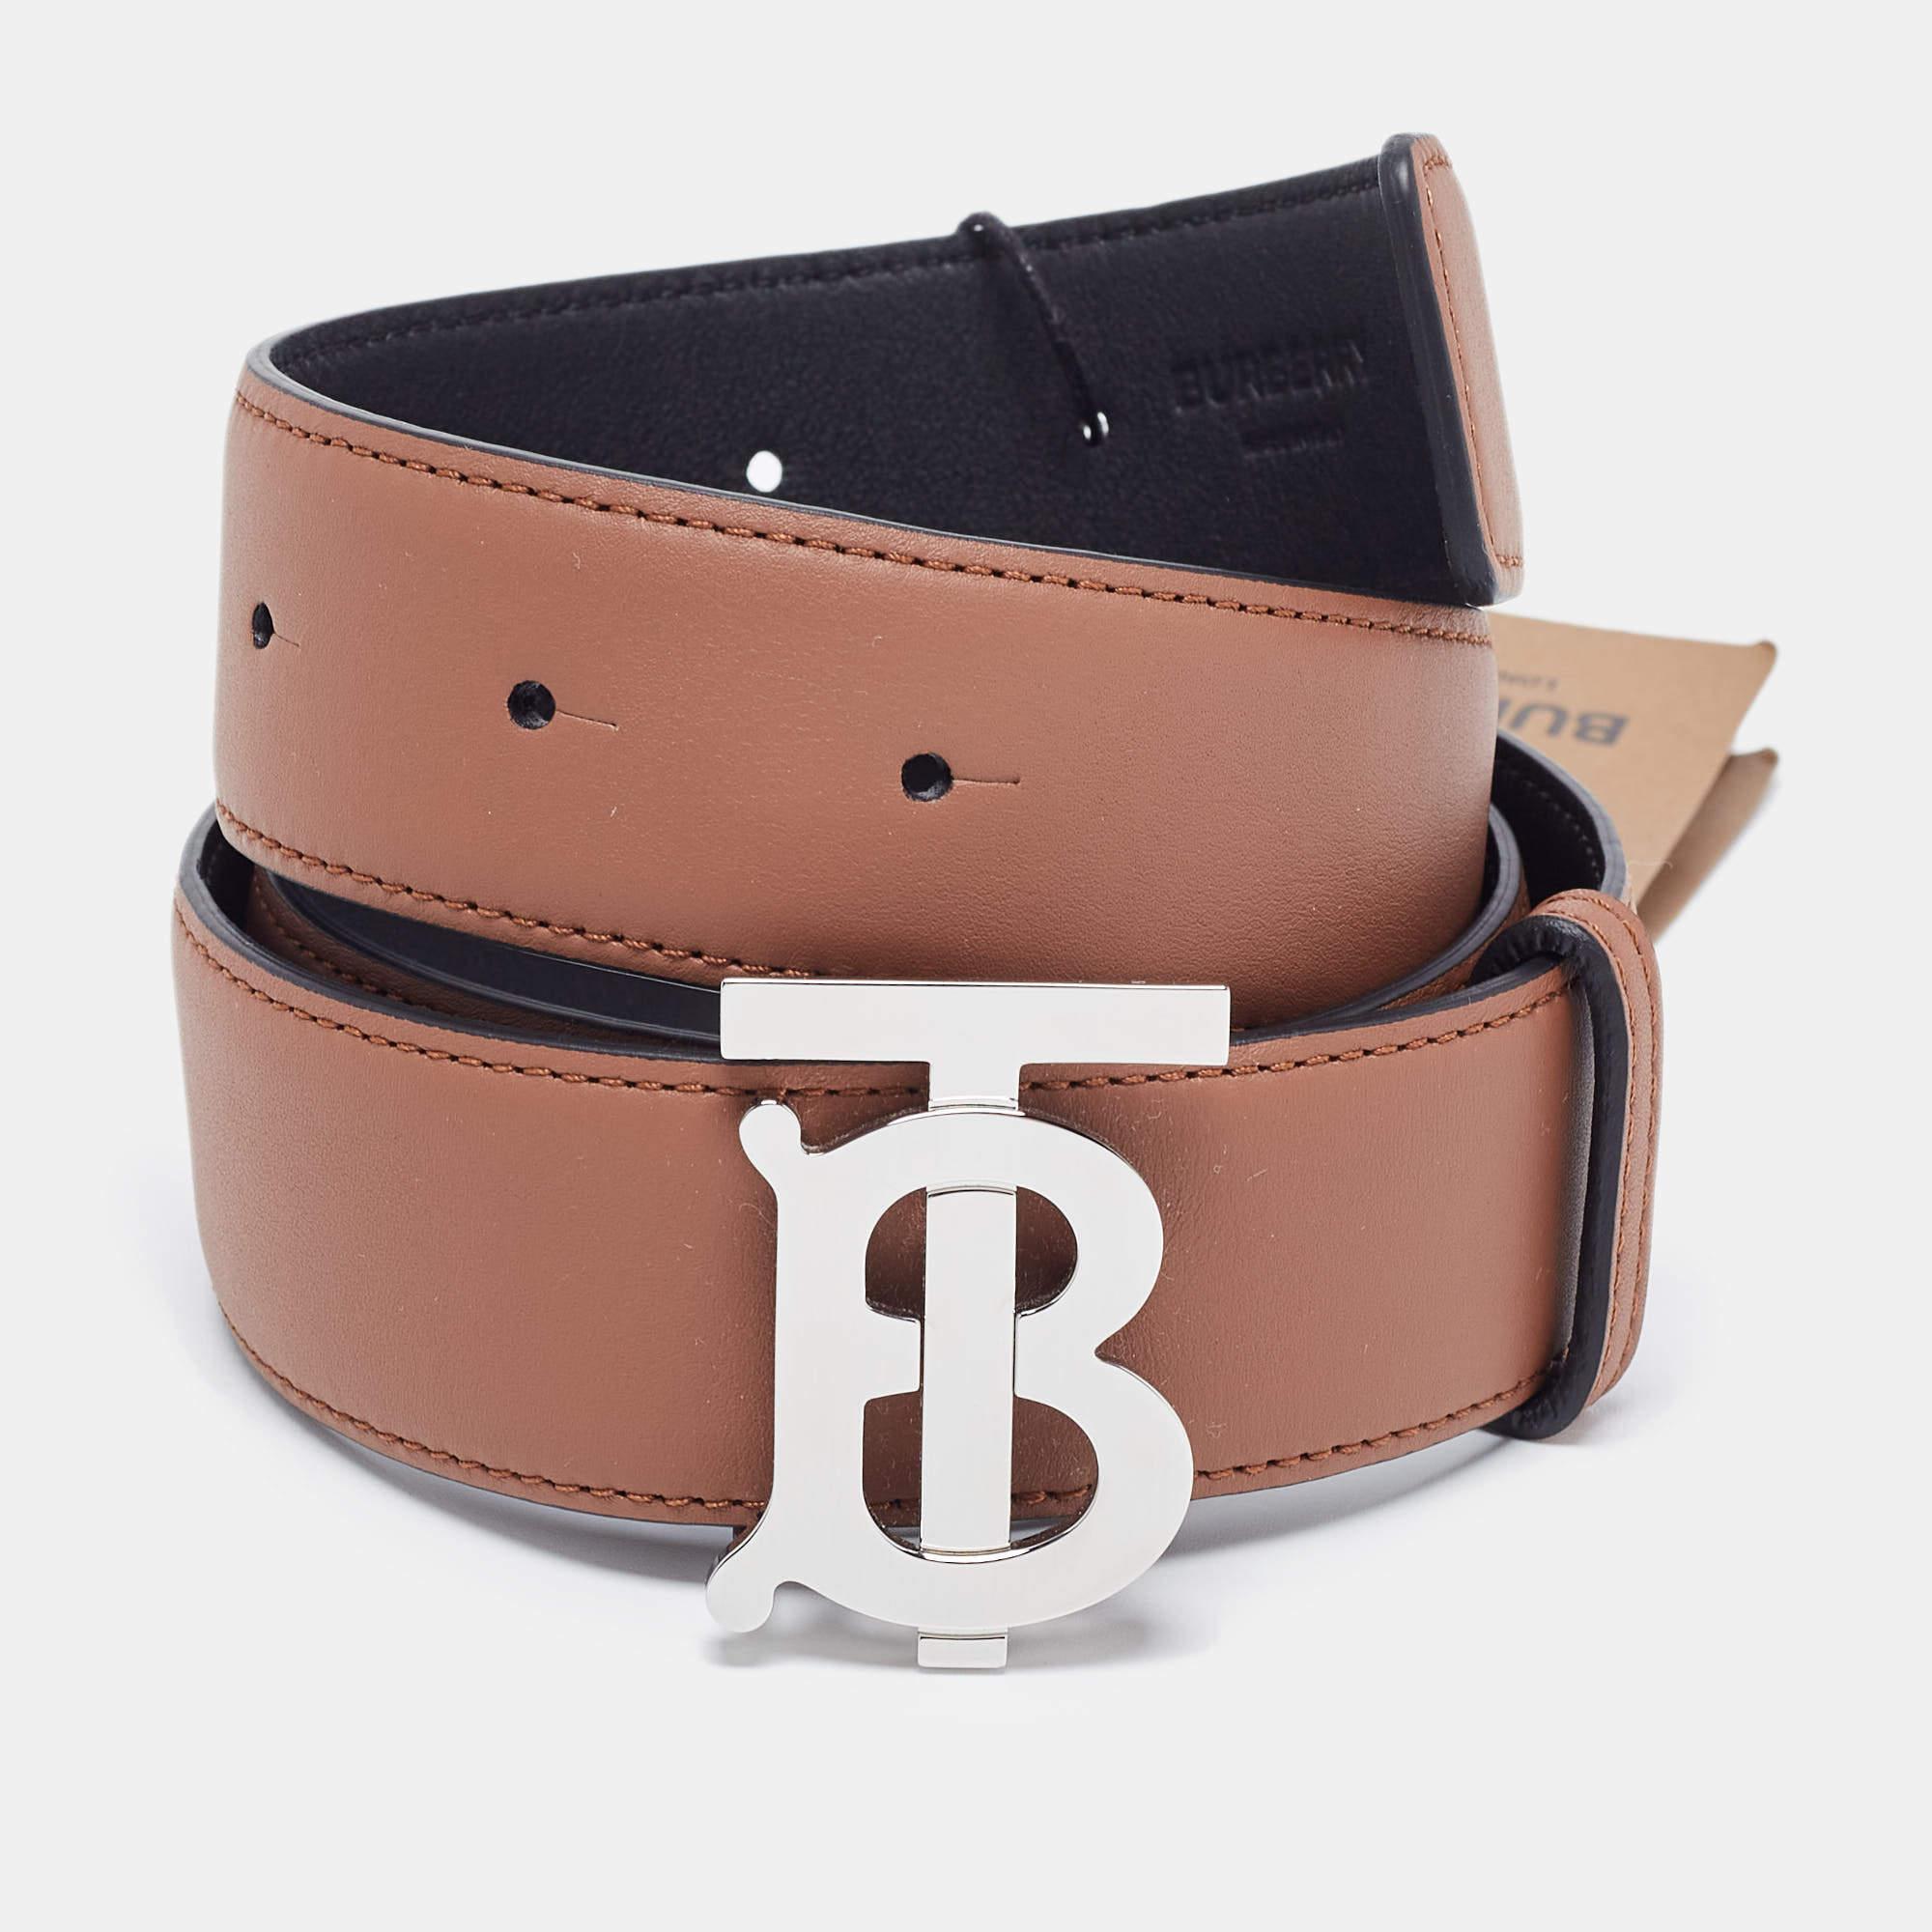 The Burberry belt is a versatile and stylish accessory. Crafted from high-quality leather, it features a reversible design with black and brown sides. The iconic TB logo is prominently displayed on the polished silver-tone buckle, making it a